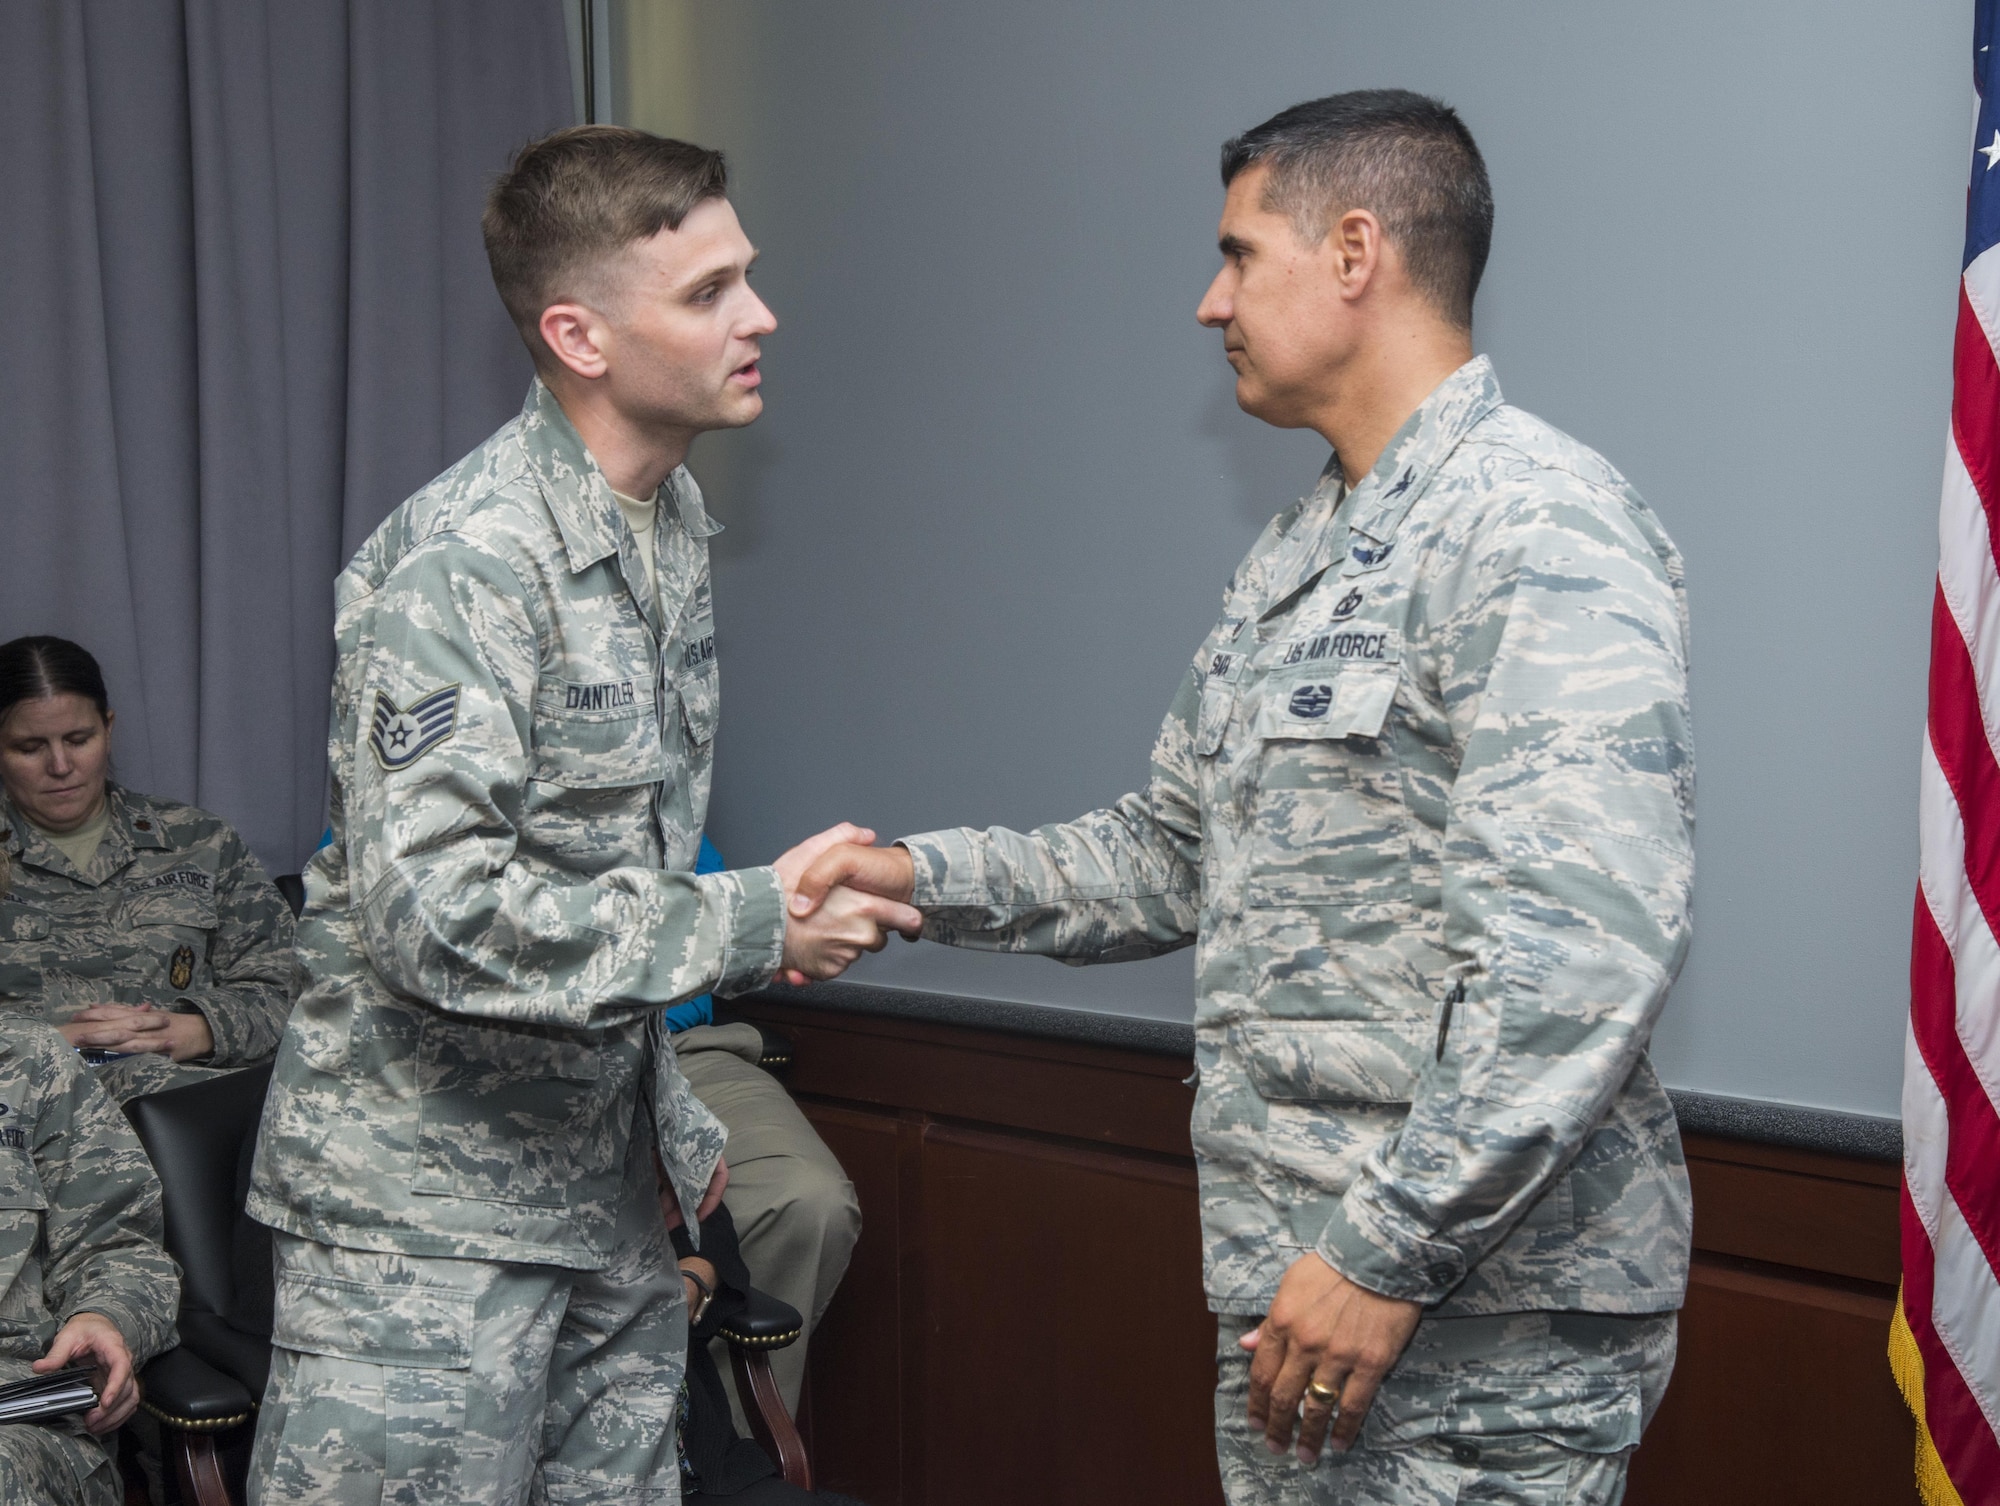 Col. Eric Shafa, 42nd Air Base Wing commander, presents Staff Sgt. Robert Dantzler, 42nd Air Base Wing Public Affairs broadcast journalist, a commander’s coin, May 15, 2017, Maxwell Air Force Base, Ala. Dantzler was awarded first place in the 2016 Defense Media Award’s Video Feature Story category for his video “Our Names on Her Arm.” The video tells the story of the 455th Expeditionary Medical Group’s mission to save the life and leg of a six year old girl who had been shot. Dantzler made the video while deployed at Bagram Airfield, Afghanistan. (U.S. Air Force photo/ Senior Airman Alexa Culbert)